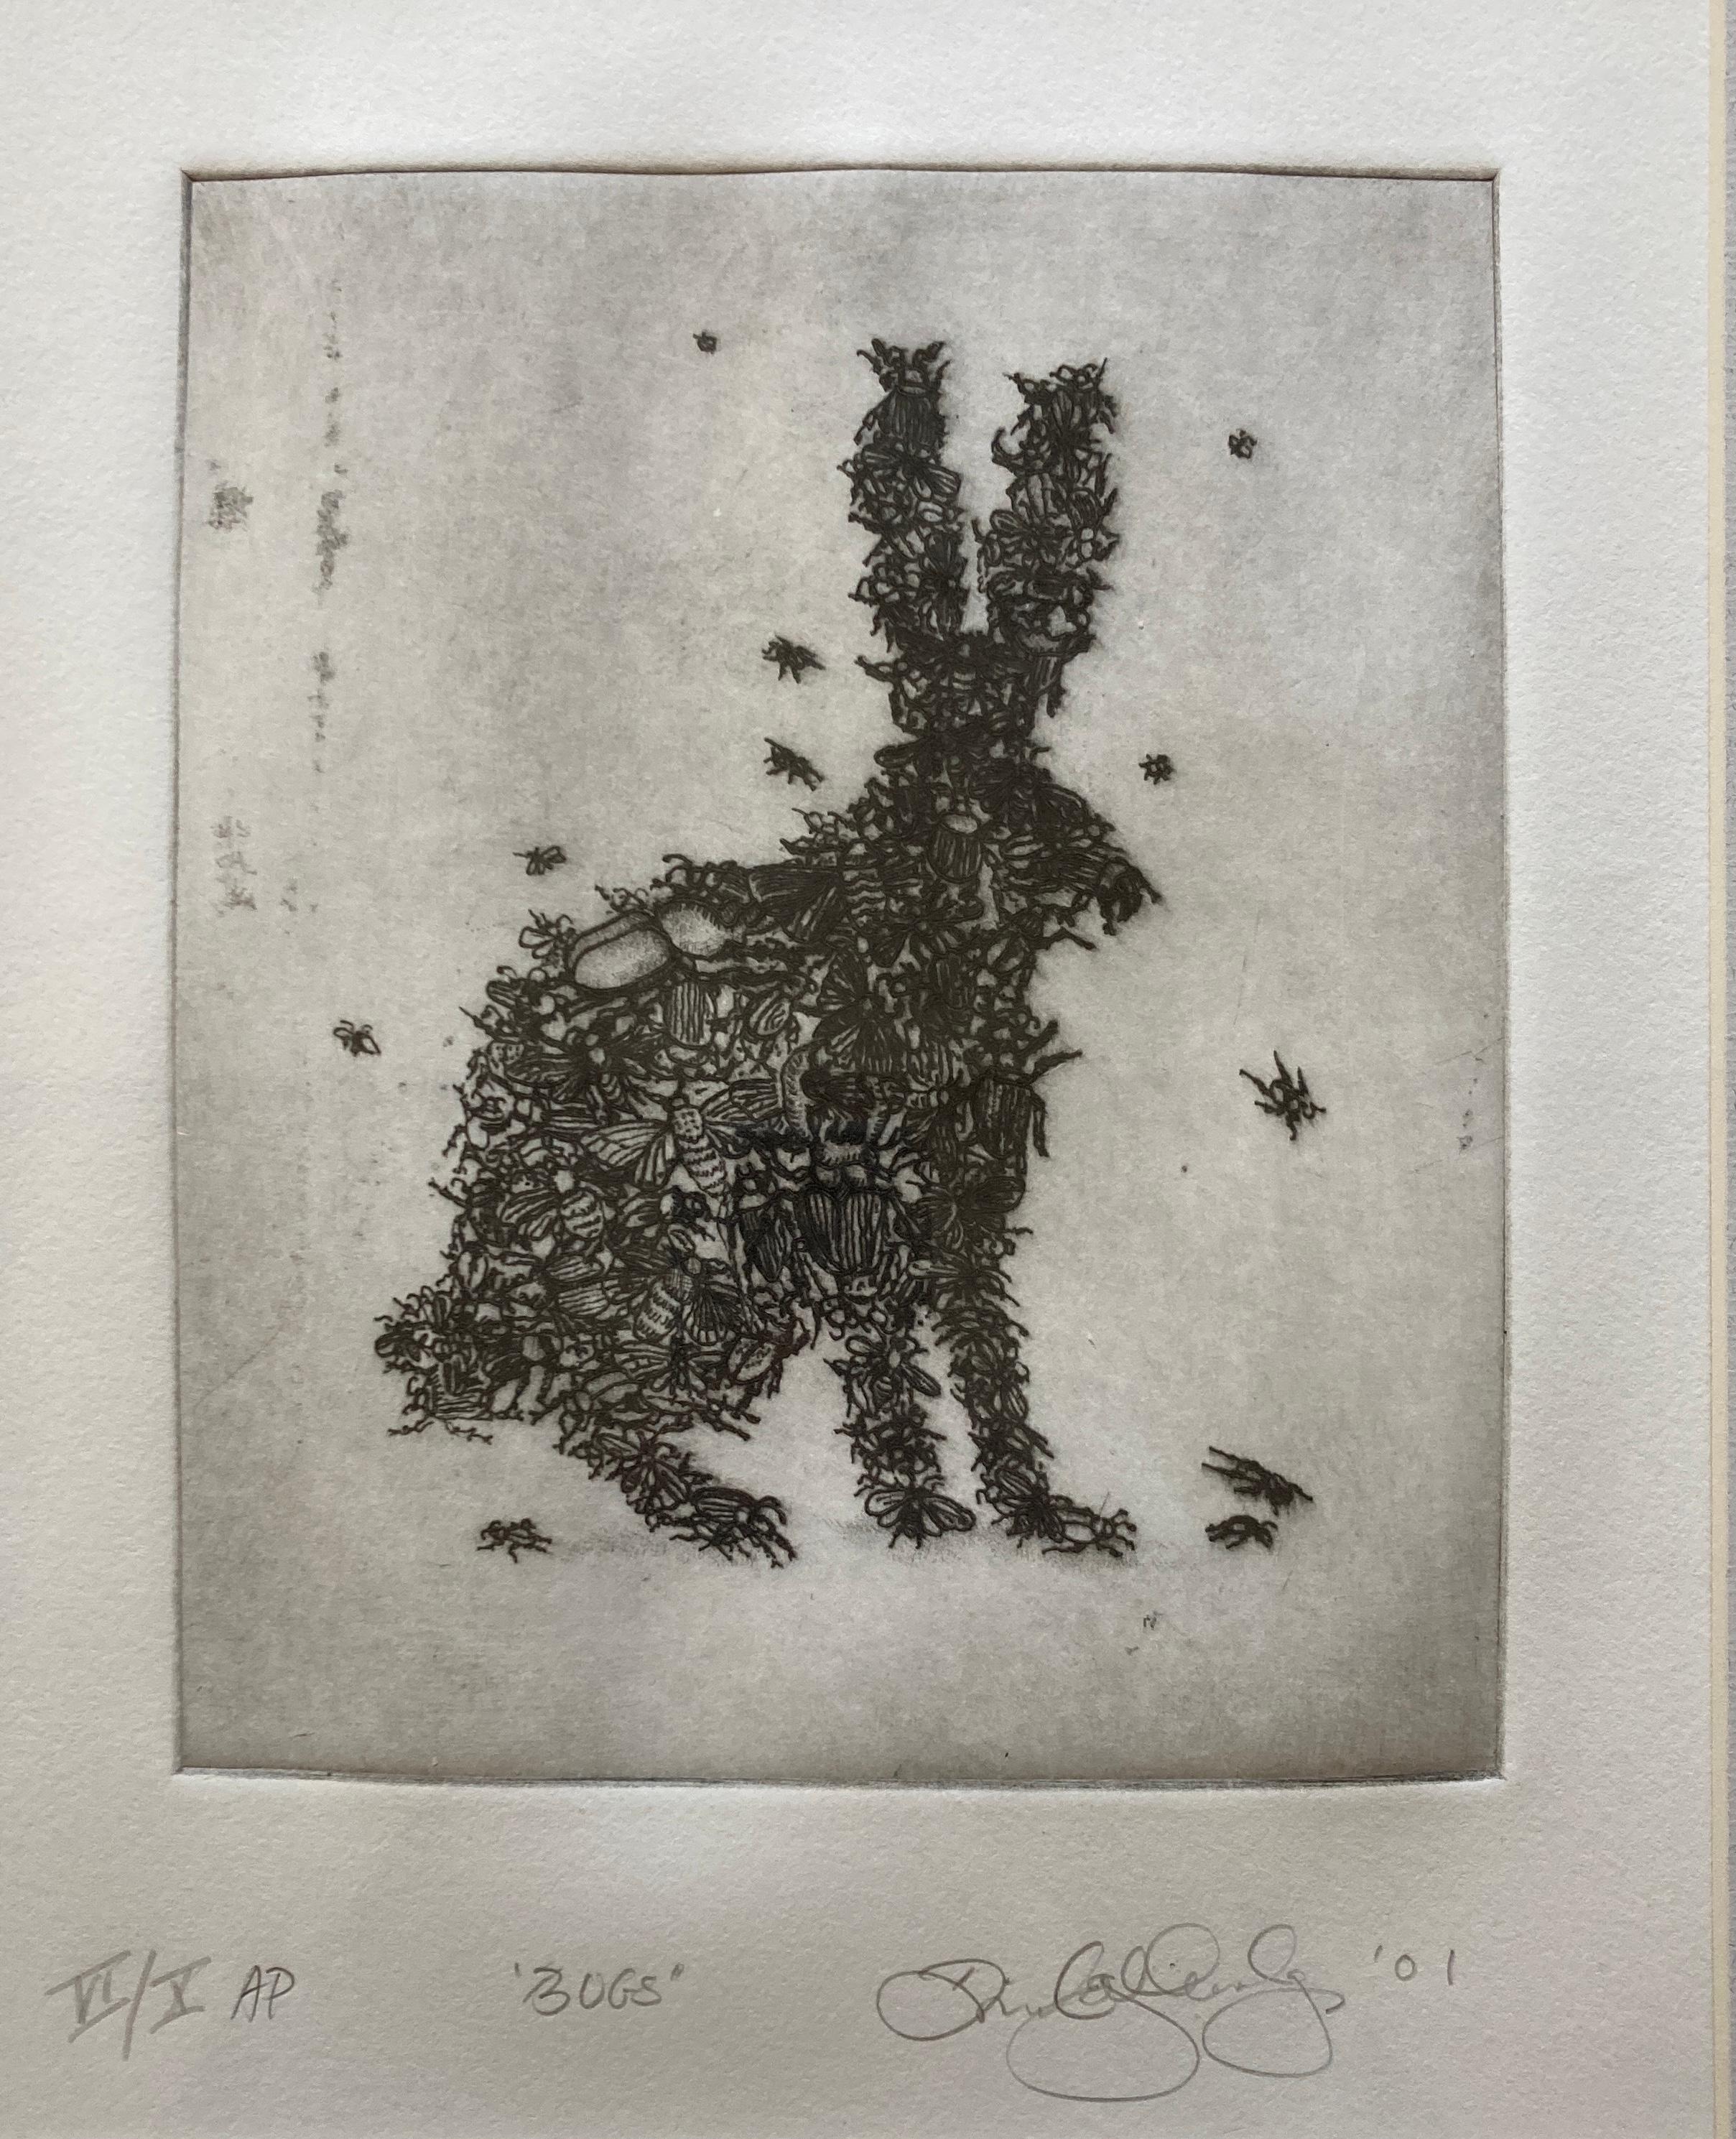 David Gilhooly 'Bugs' Artist's Proof Signed Etching Print